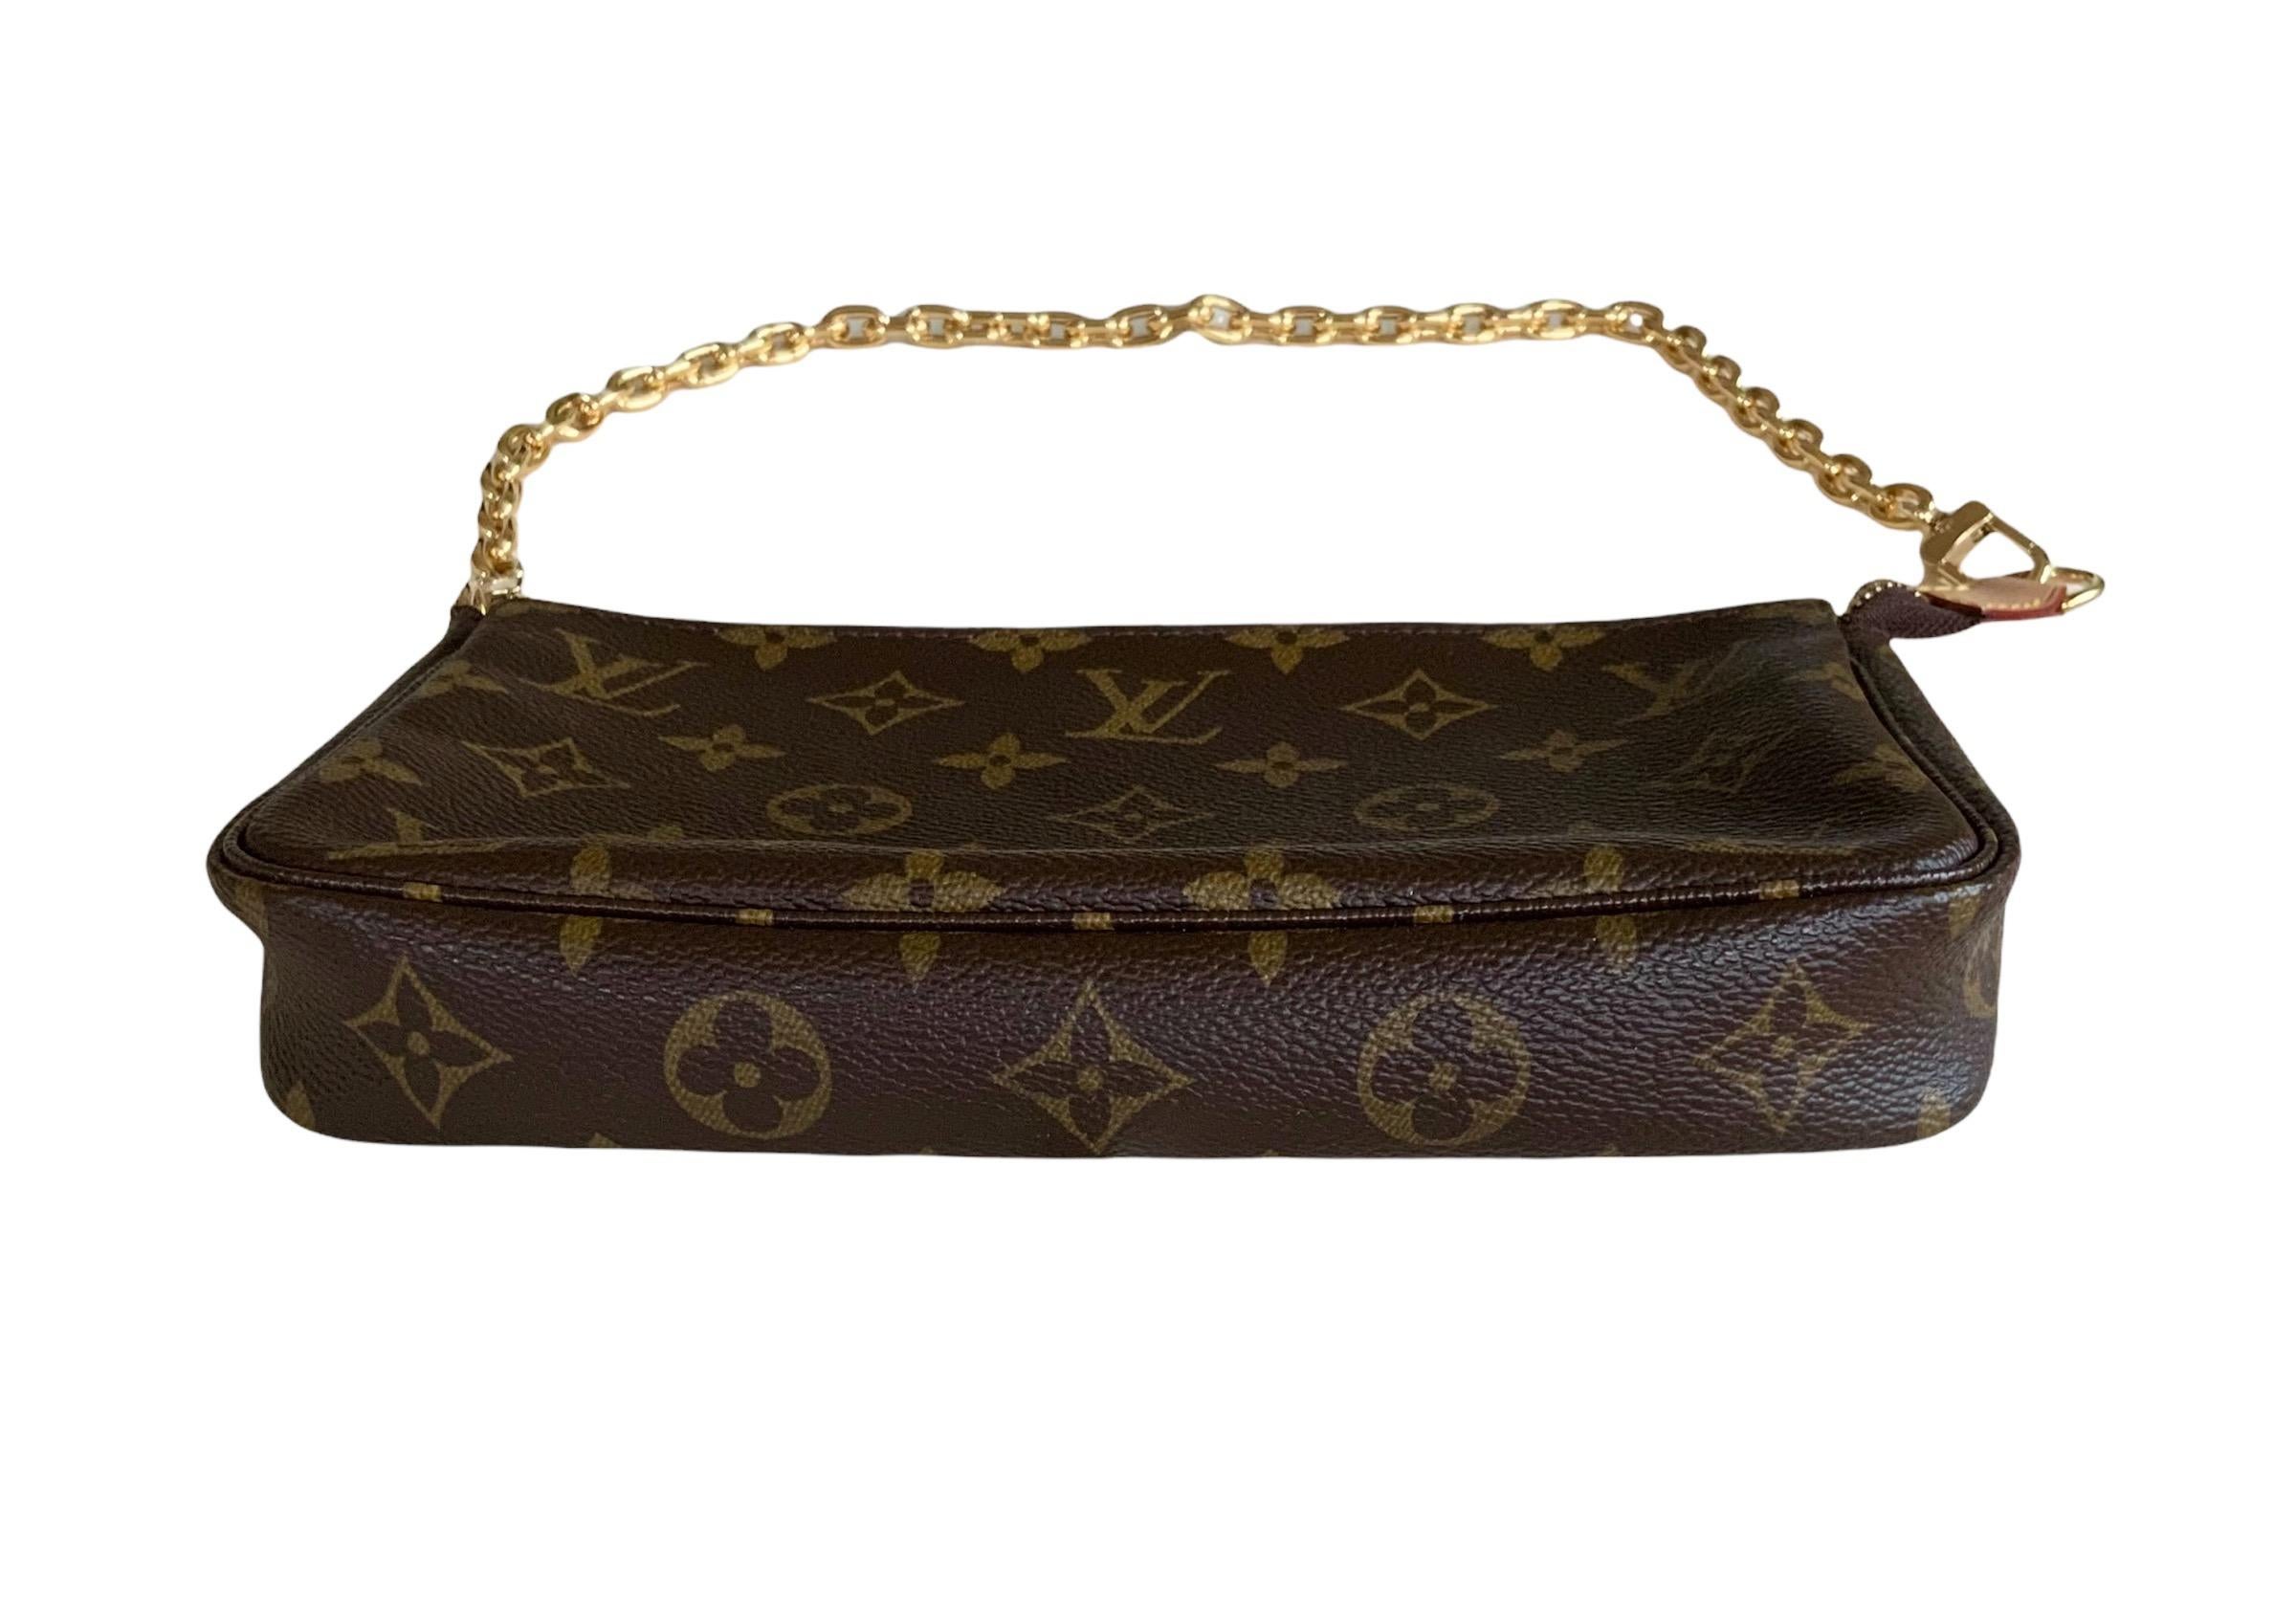 This iconic pre-owned pochette accessoires bag from 2007 is crafted in the LV monogram canvas.
It features natural cowhide leather trimmings and a gold-tone chain strap which is removable but not adjustable.
It is in great condition.
   
Material: